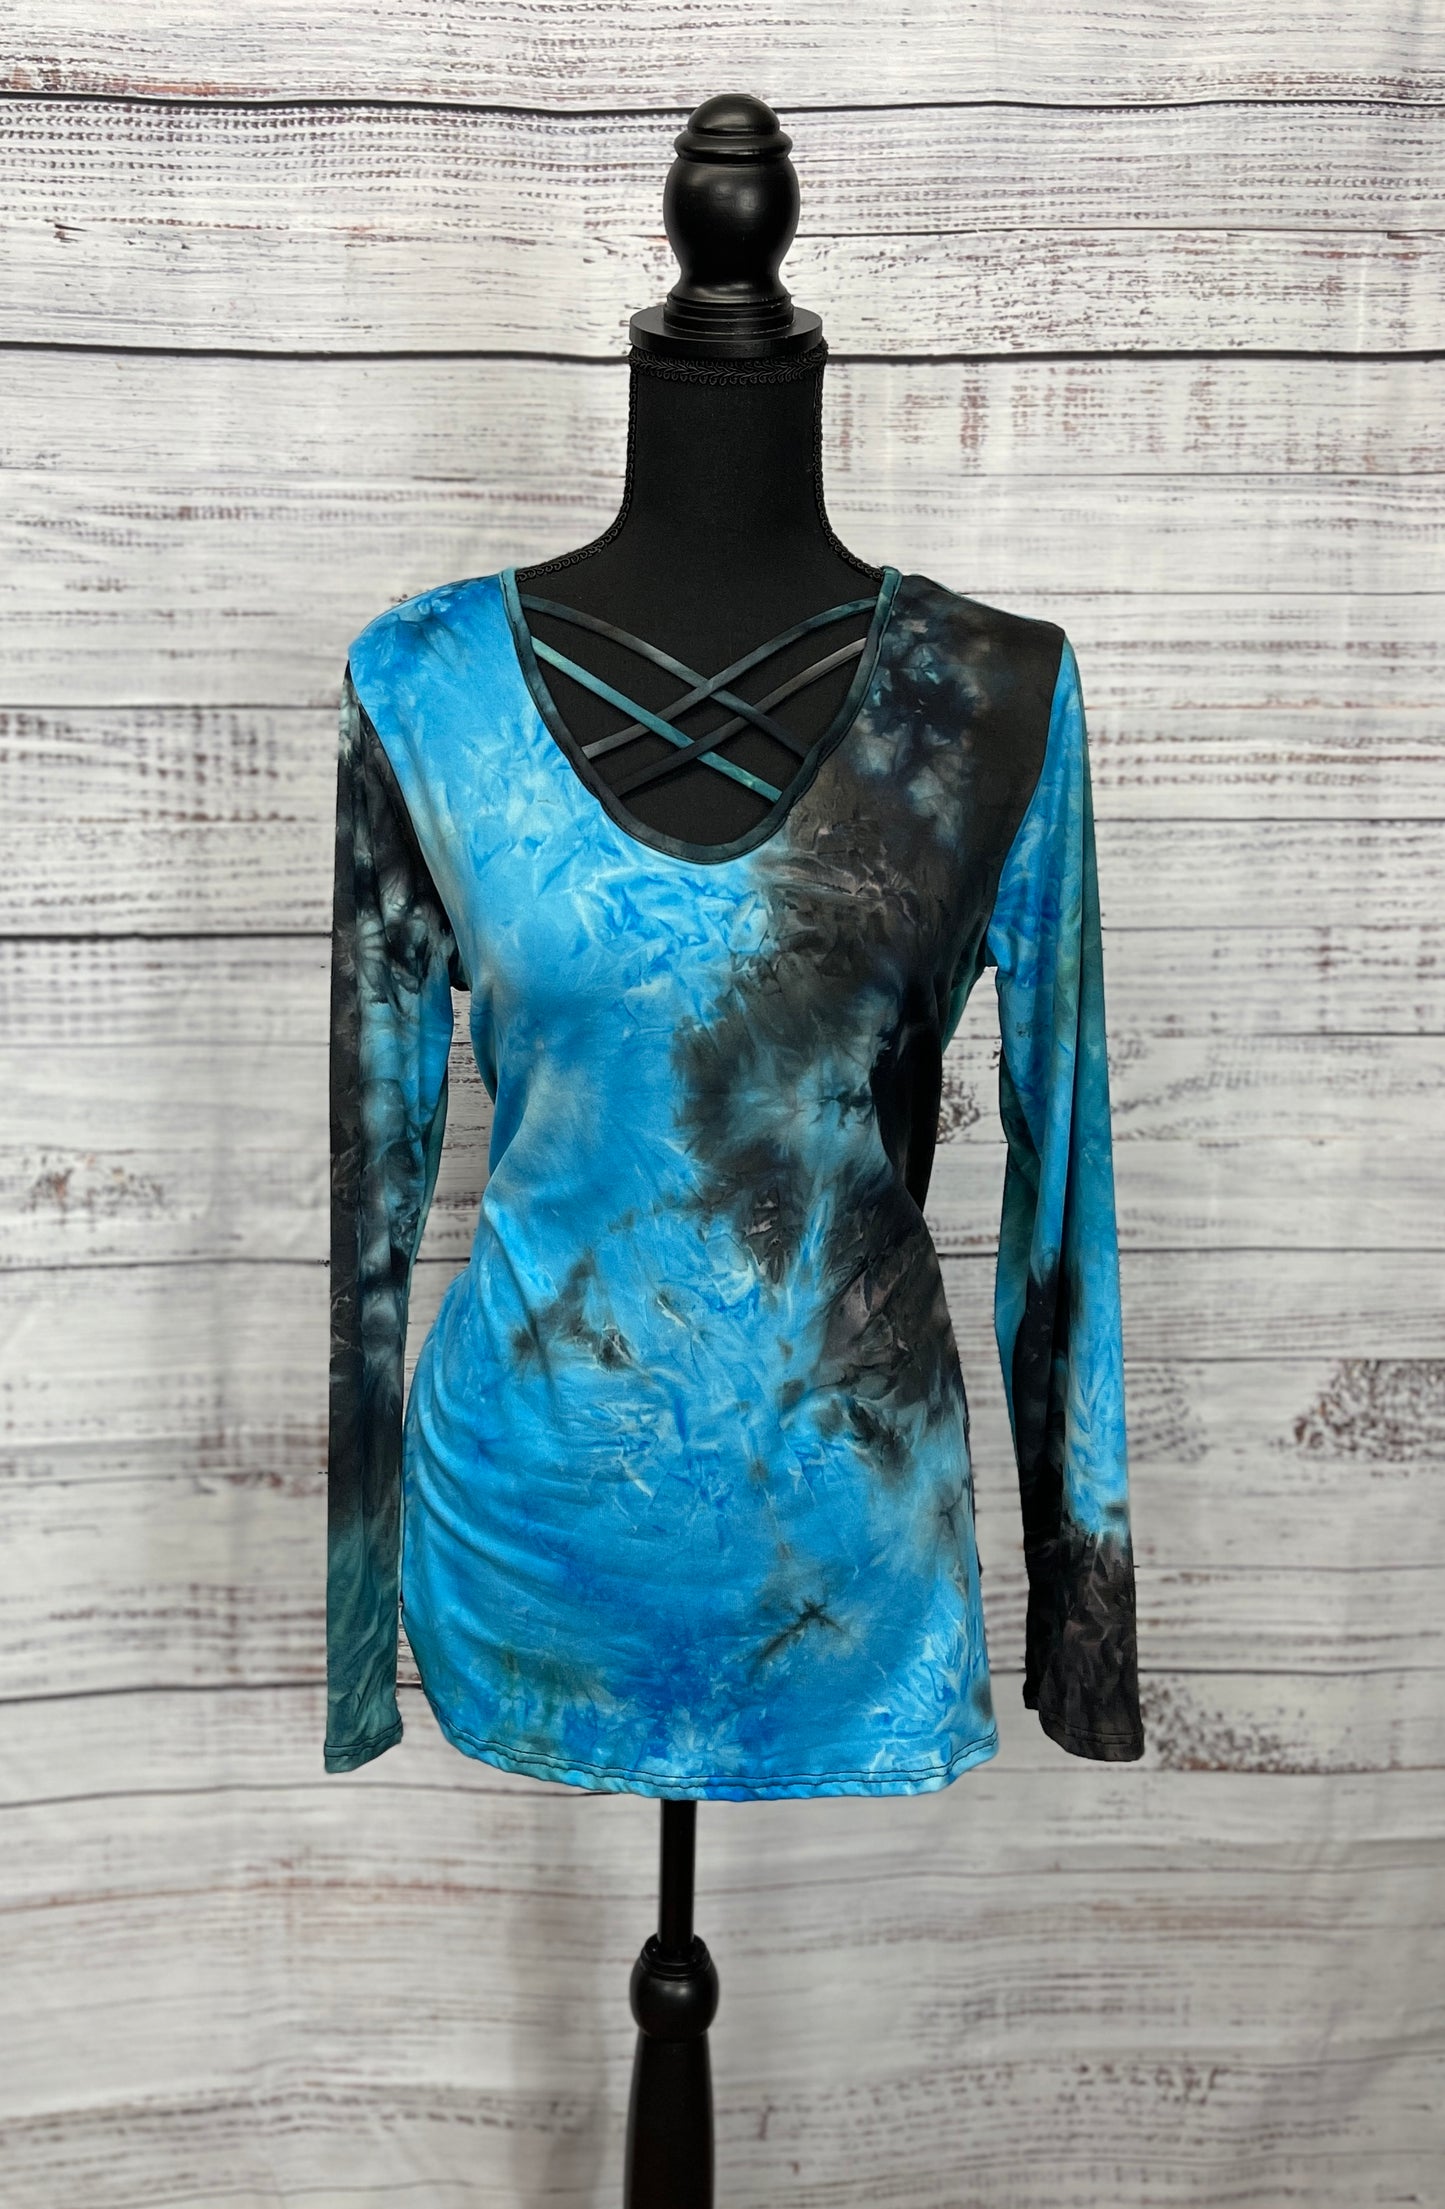 Blue & Black Criss Cross V-Neck Top With Rhinestone Motorcycle/Eagle